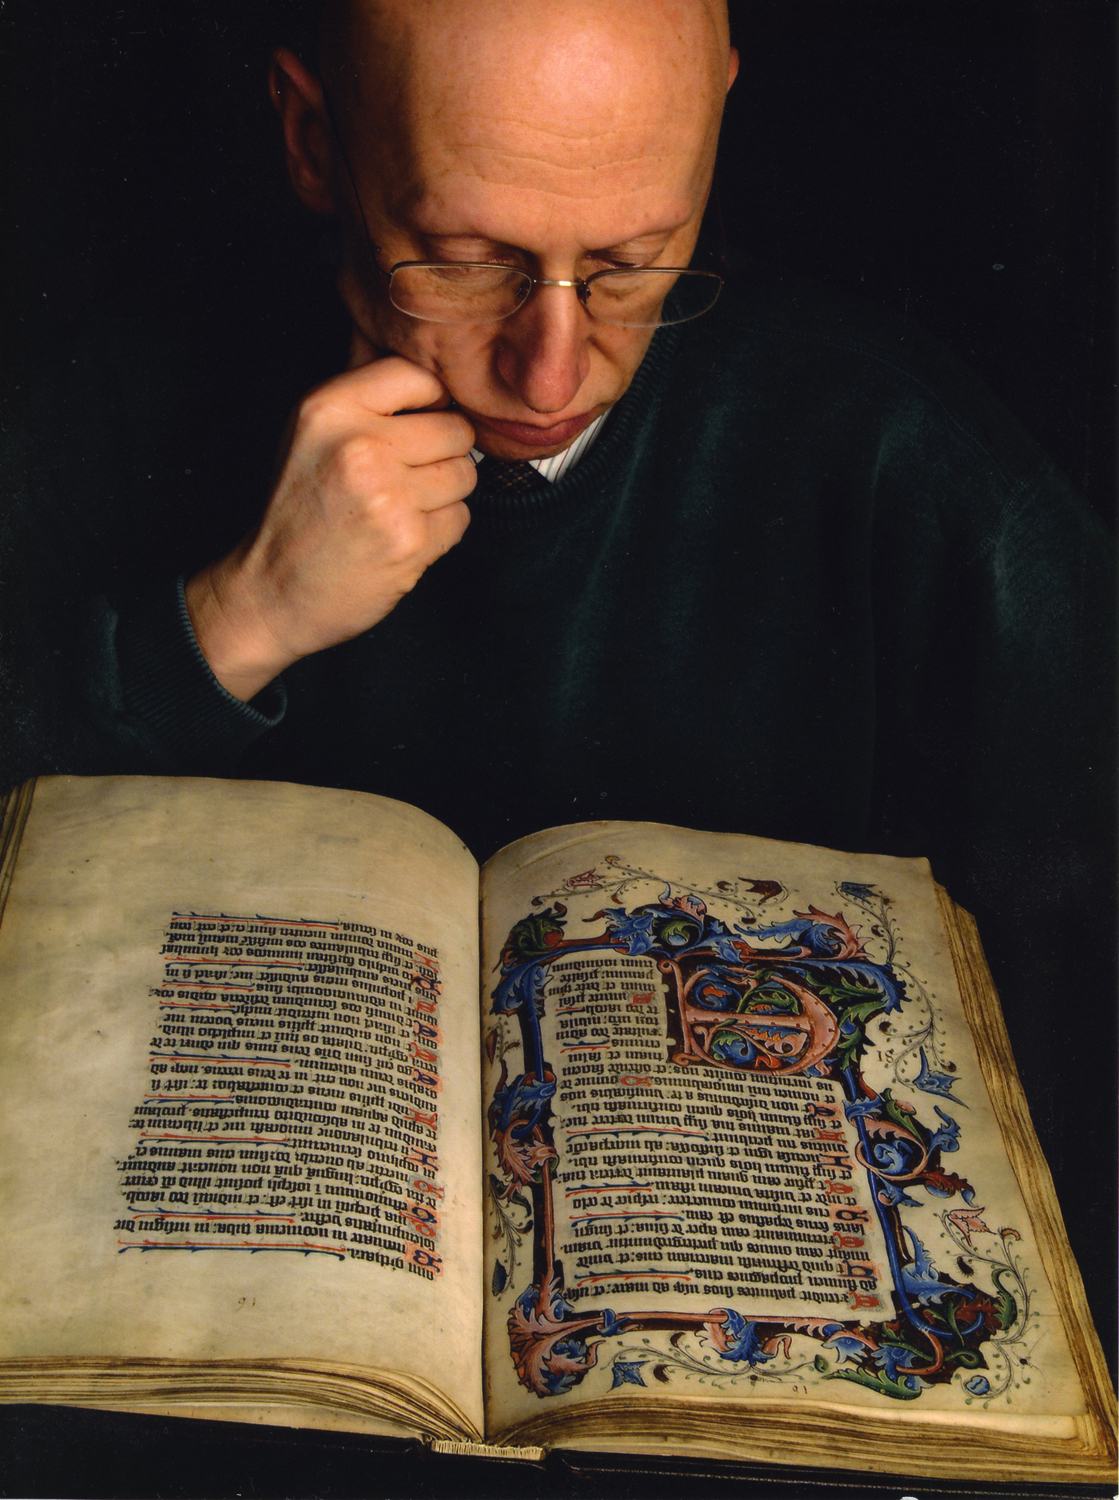 Norman Reid, Head of Special Collections, with the "St Andrews Psalter" (photograph by Peter Adamson)